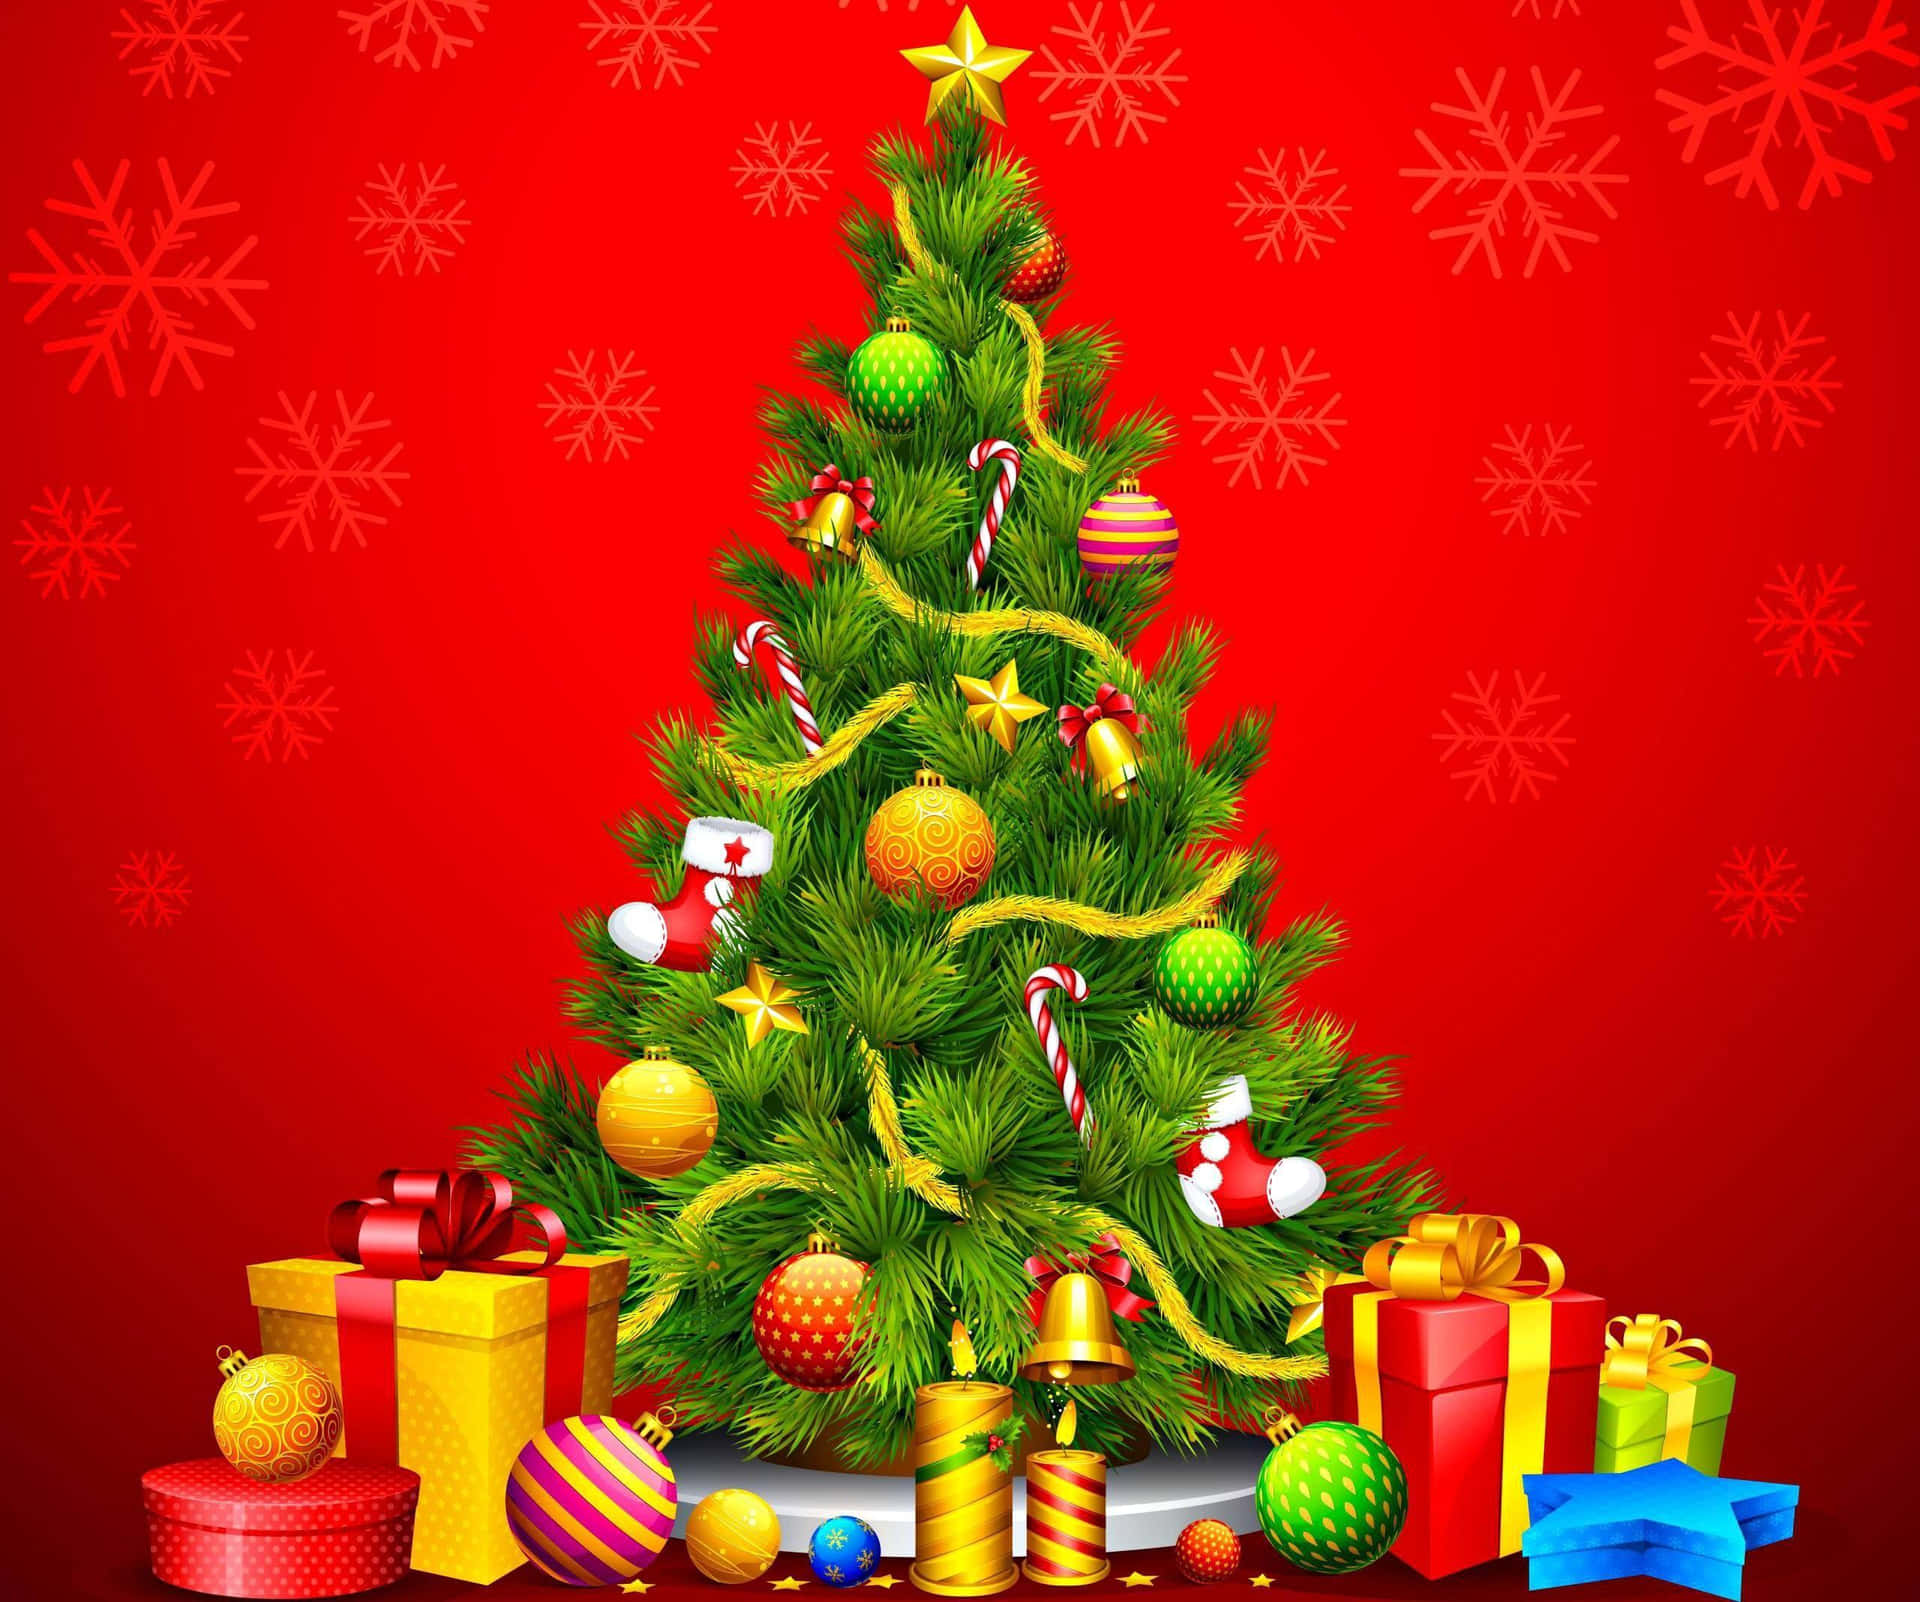 "A beautiful red and green Christmas adding a vibrant touch of decor to any festive scene!" Wallpaper